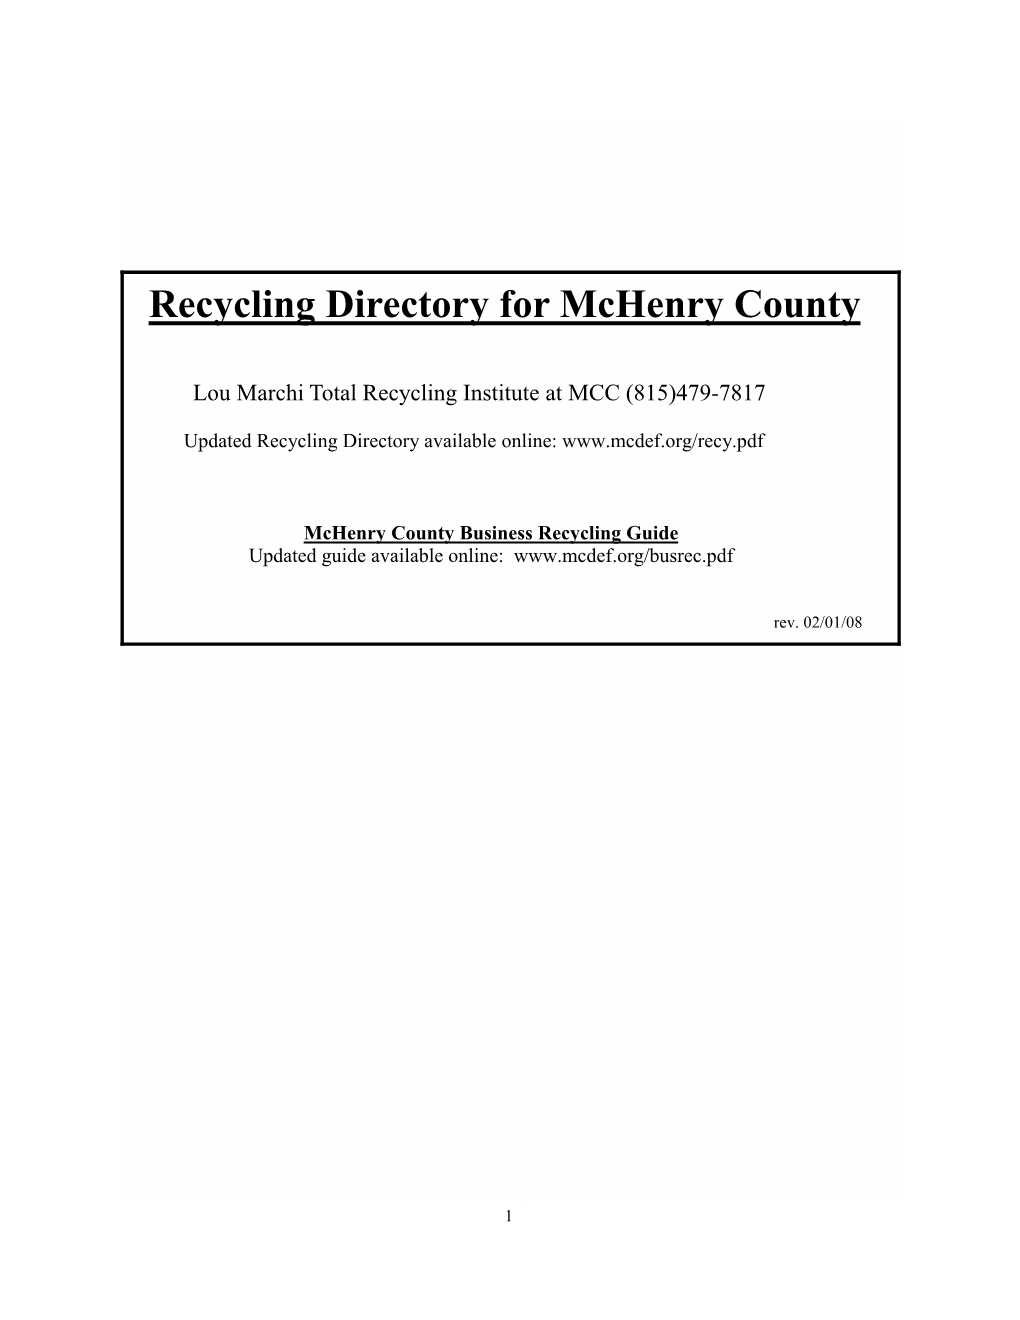 Recycling Directory for Mchenry County